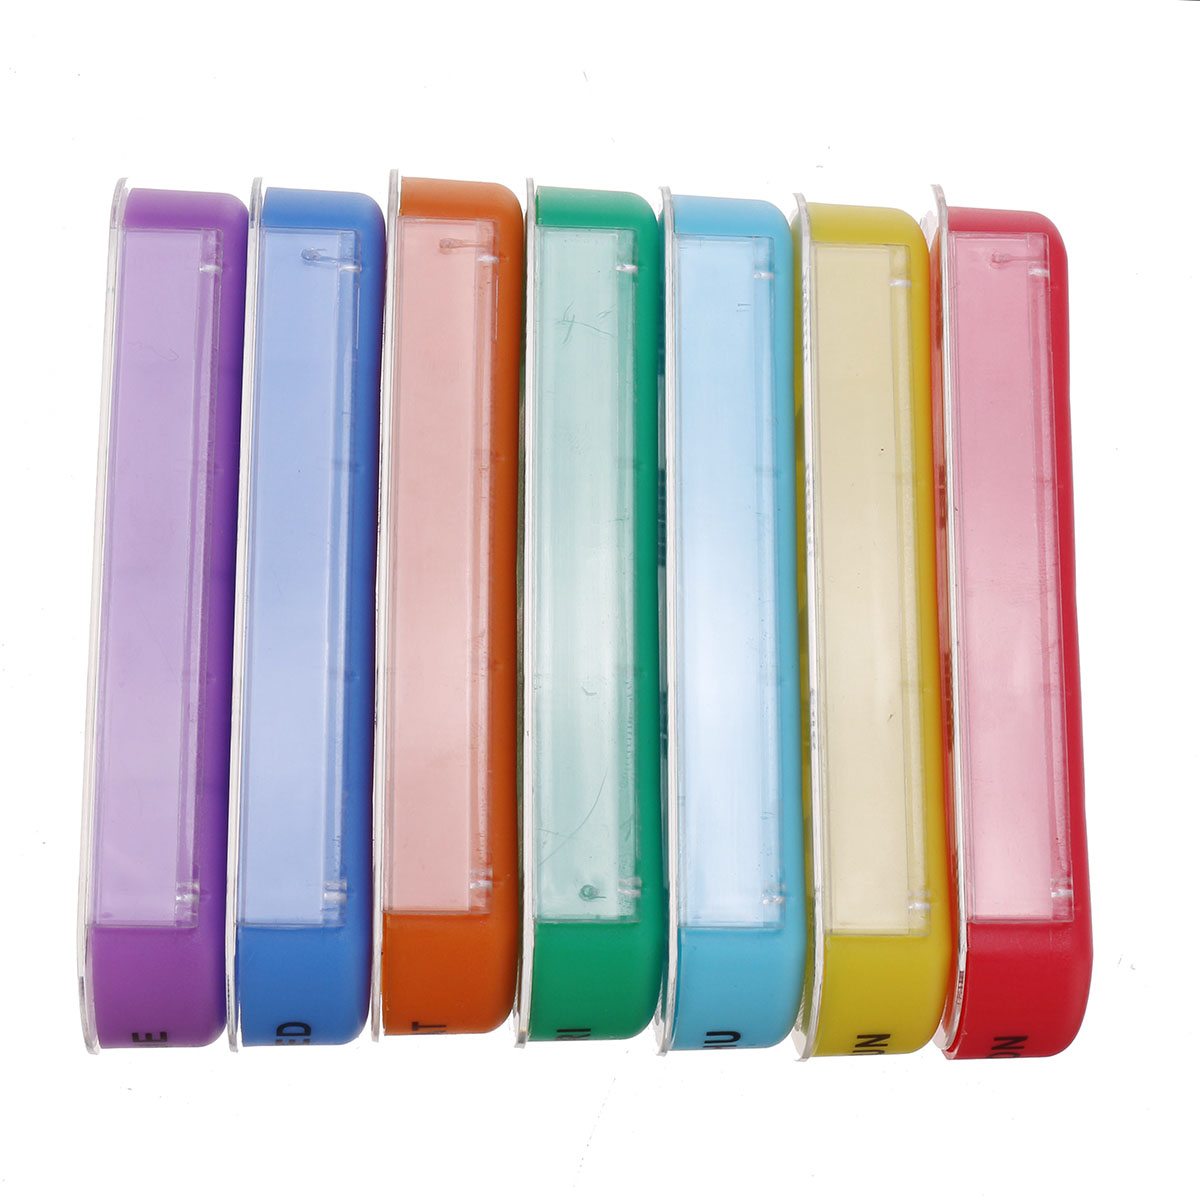 

Weekly Pill Case Storage Organizer Medication Container